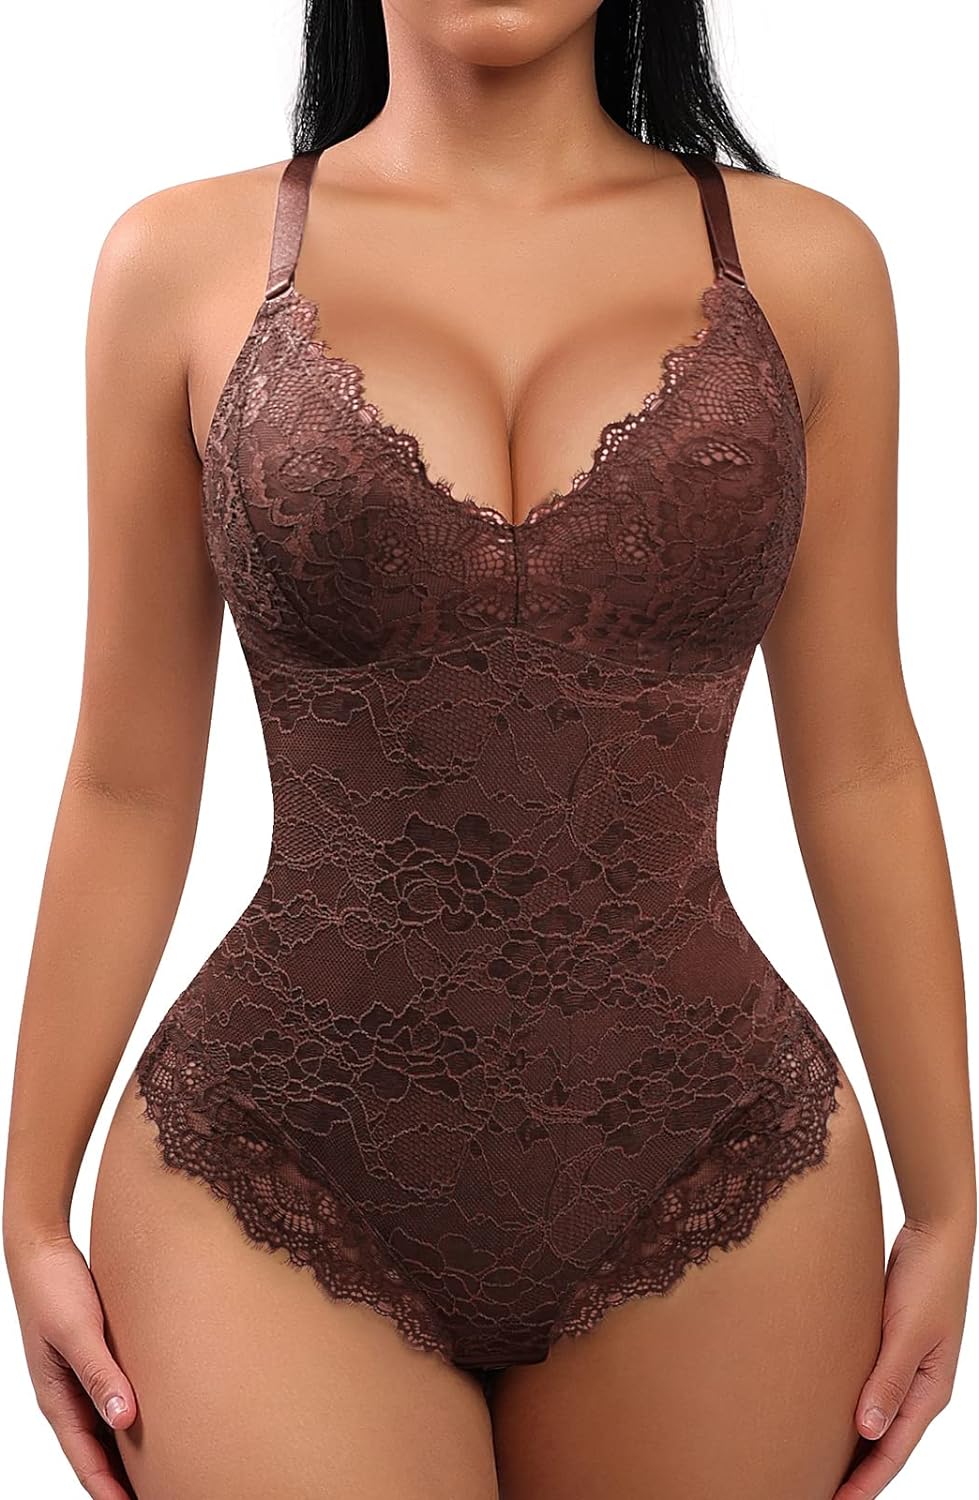 Sexy Lace Bodysuit With Backless Design For Women Waist Tummy